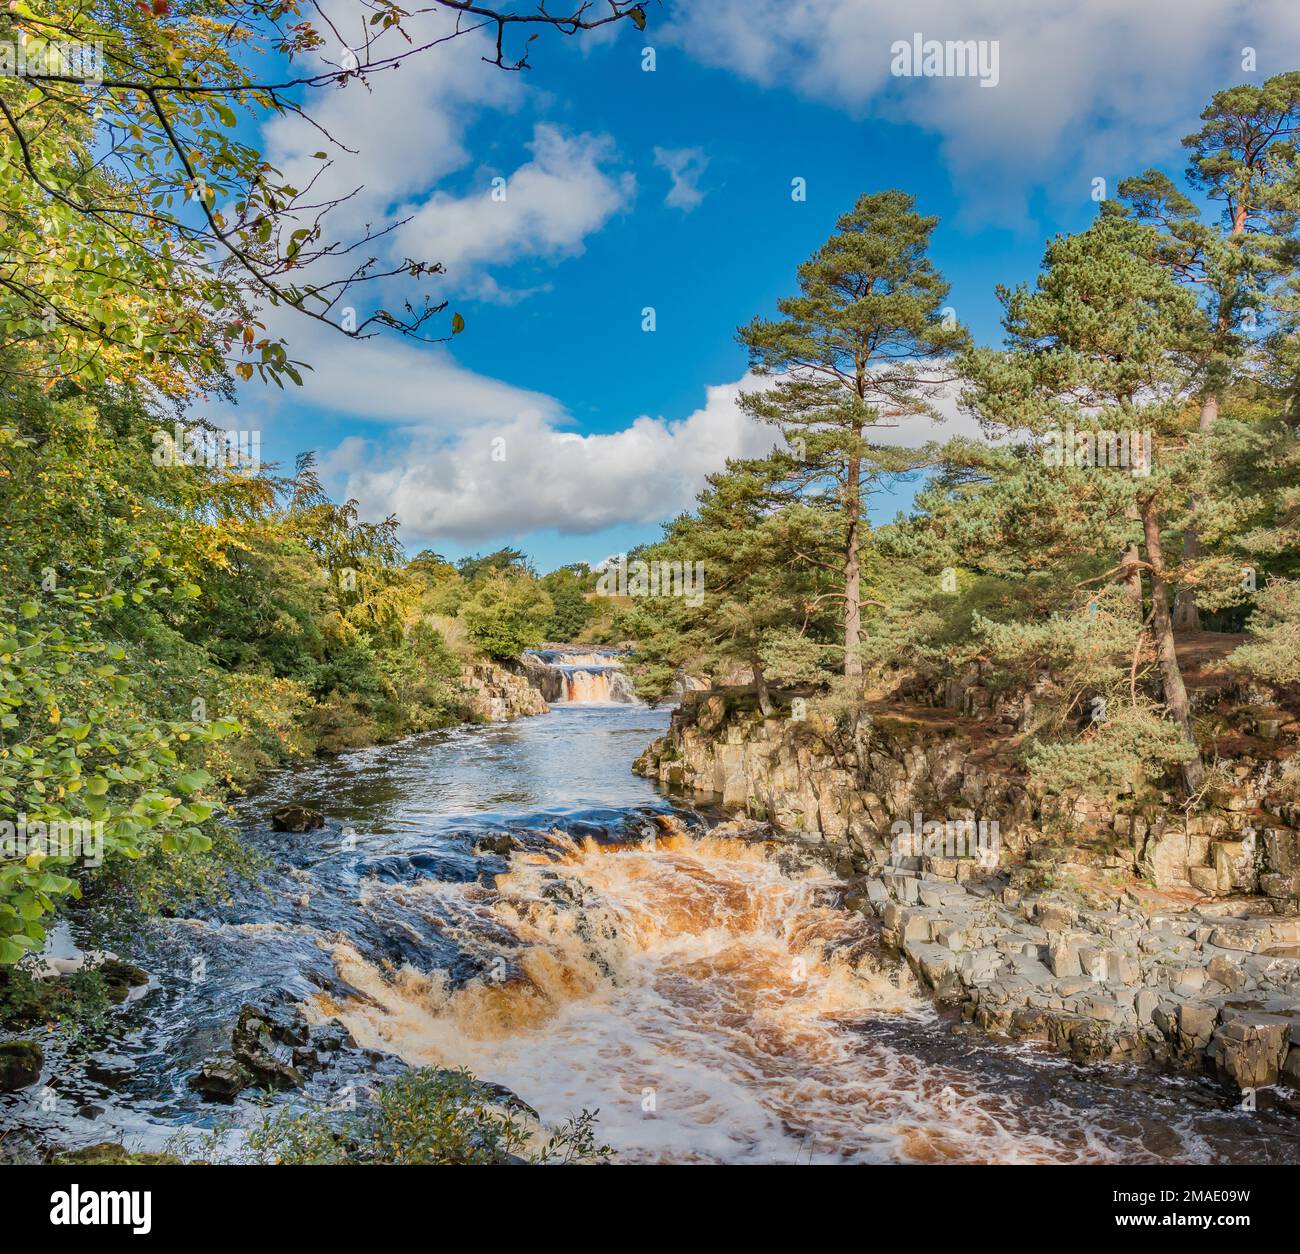 Autumn colours forming in the wooded riverbanks at Low Force. Taken from the Pennine Way long distance footpath at Wynch Bridge in strong sunshine. Stock Photo